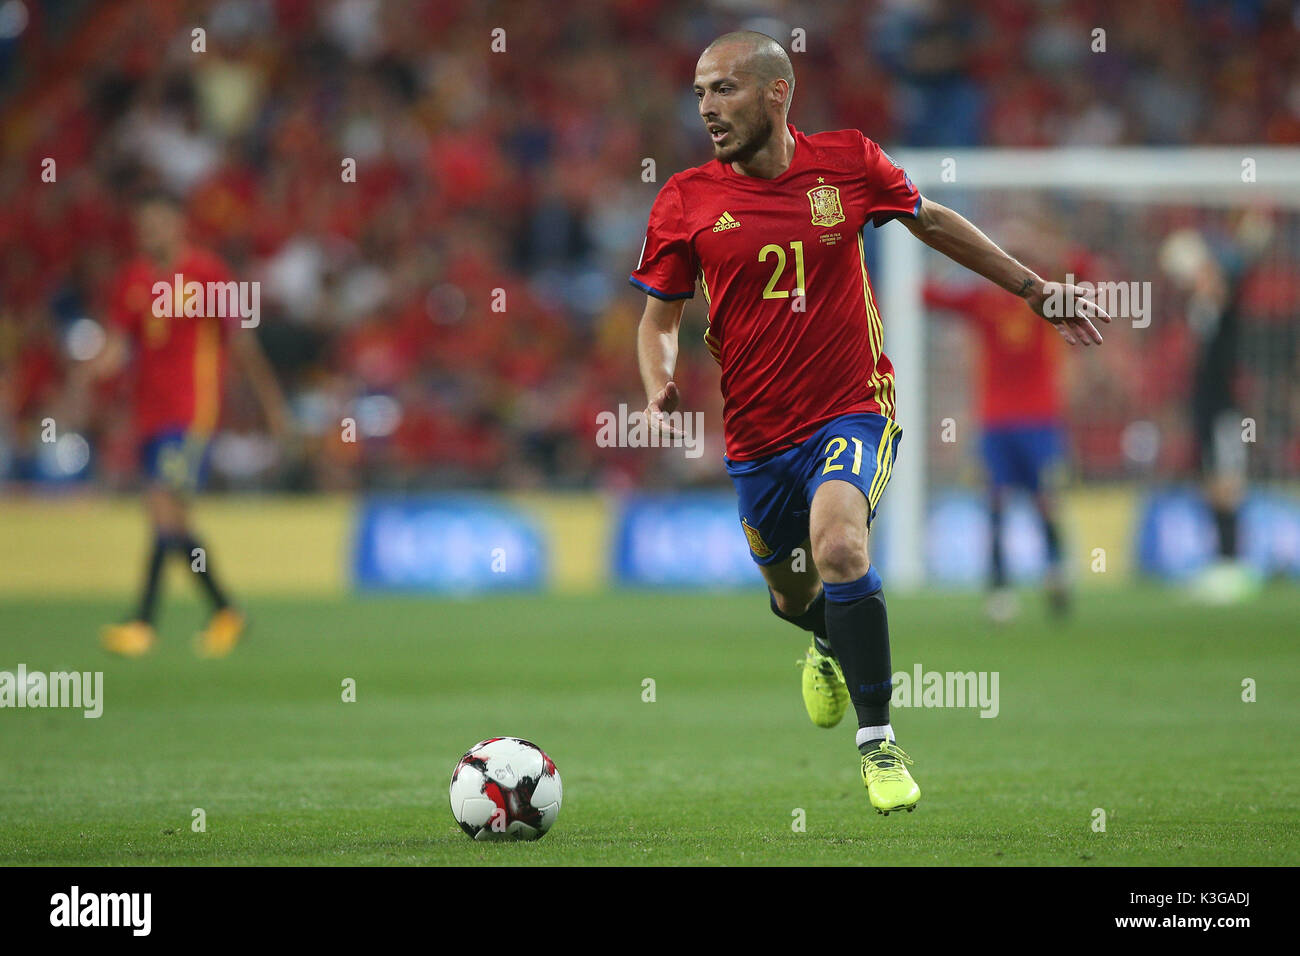 Madrid, Spain. 2nd September, 2017. FIFA 2018 World Cup Qualifier. Group G. Match between Spain vs Italy.Iniesta  in action during the match. Credit: marco iacobucci/Alamy Live News Stock Photo